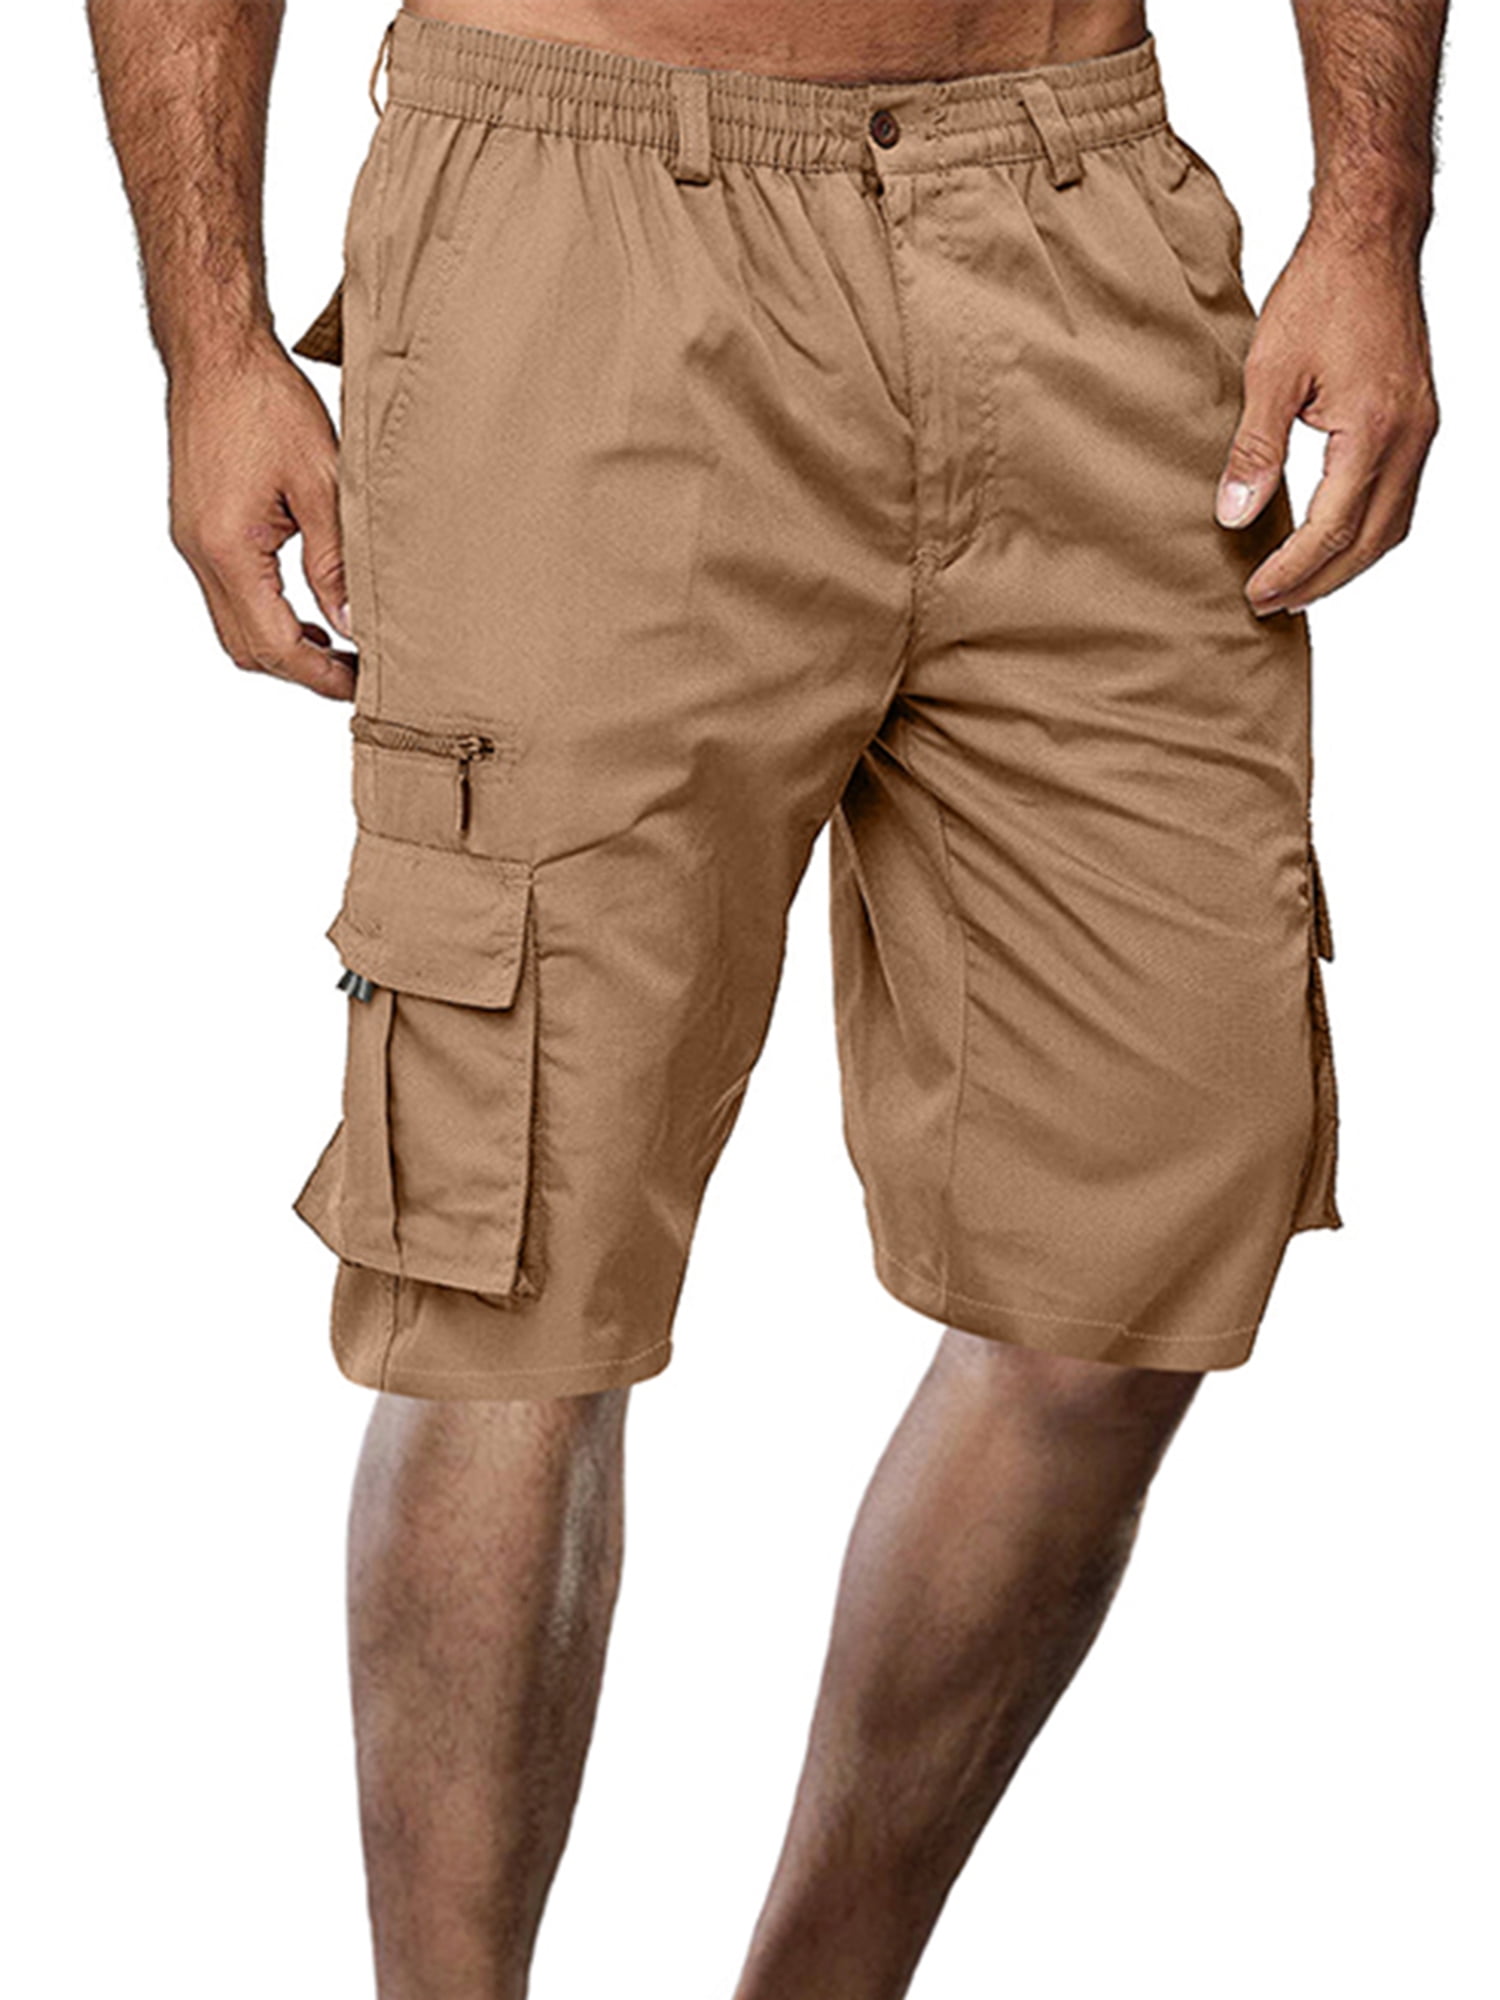 Men Shorts Cargo Relaxed Fit Elastic Waist Stretch Solid Color Summer Work Beach Casual Shorts with Pockets 